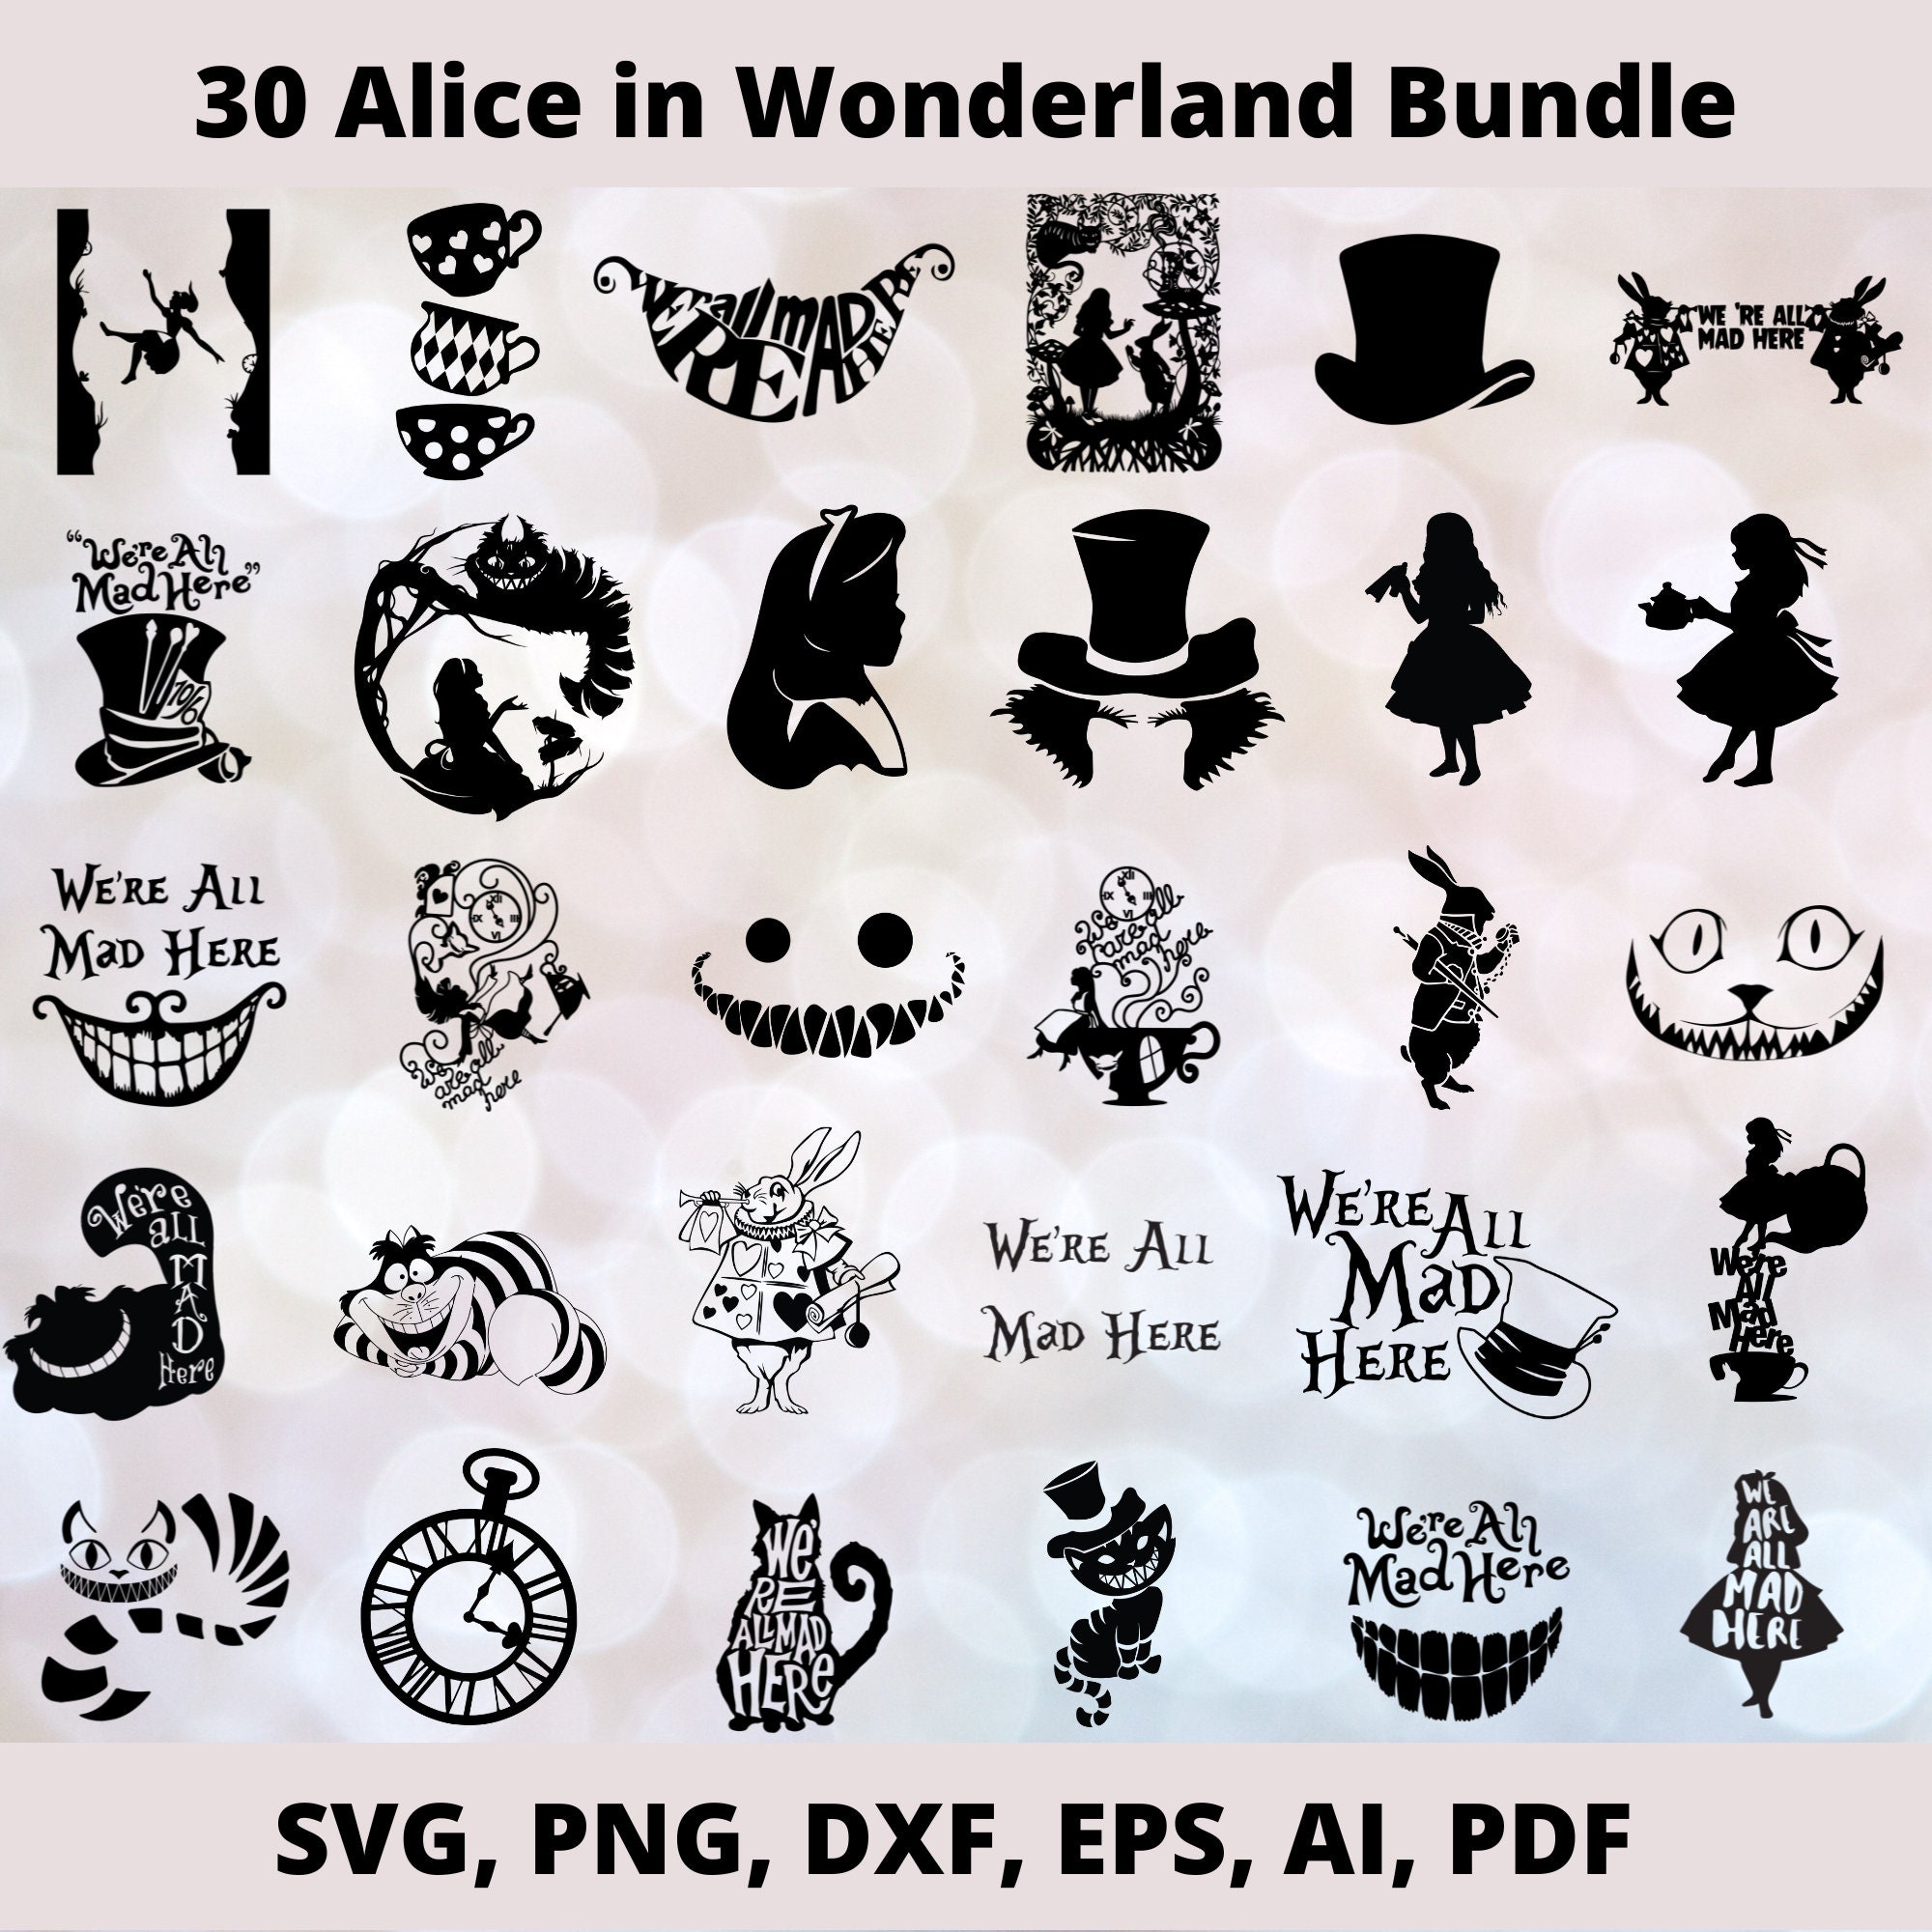 What Are the Most Important Symbols in Alice in Wonderland?